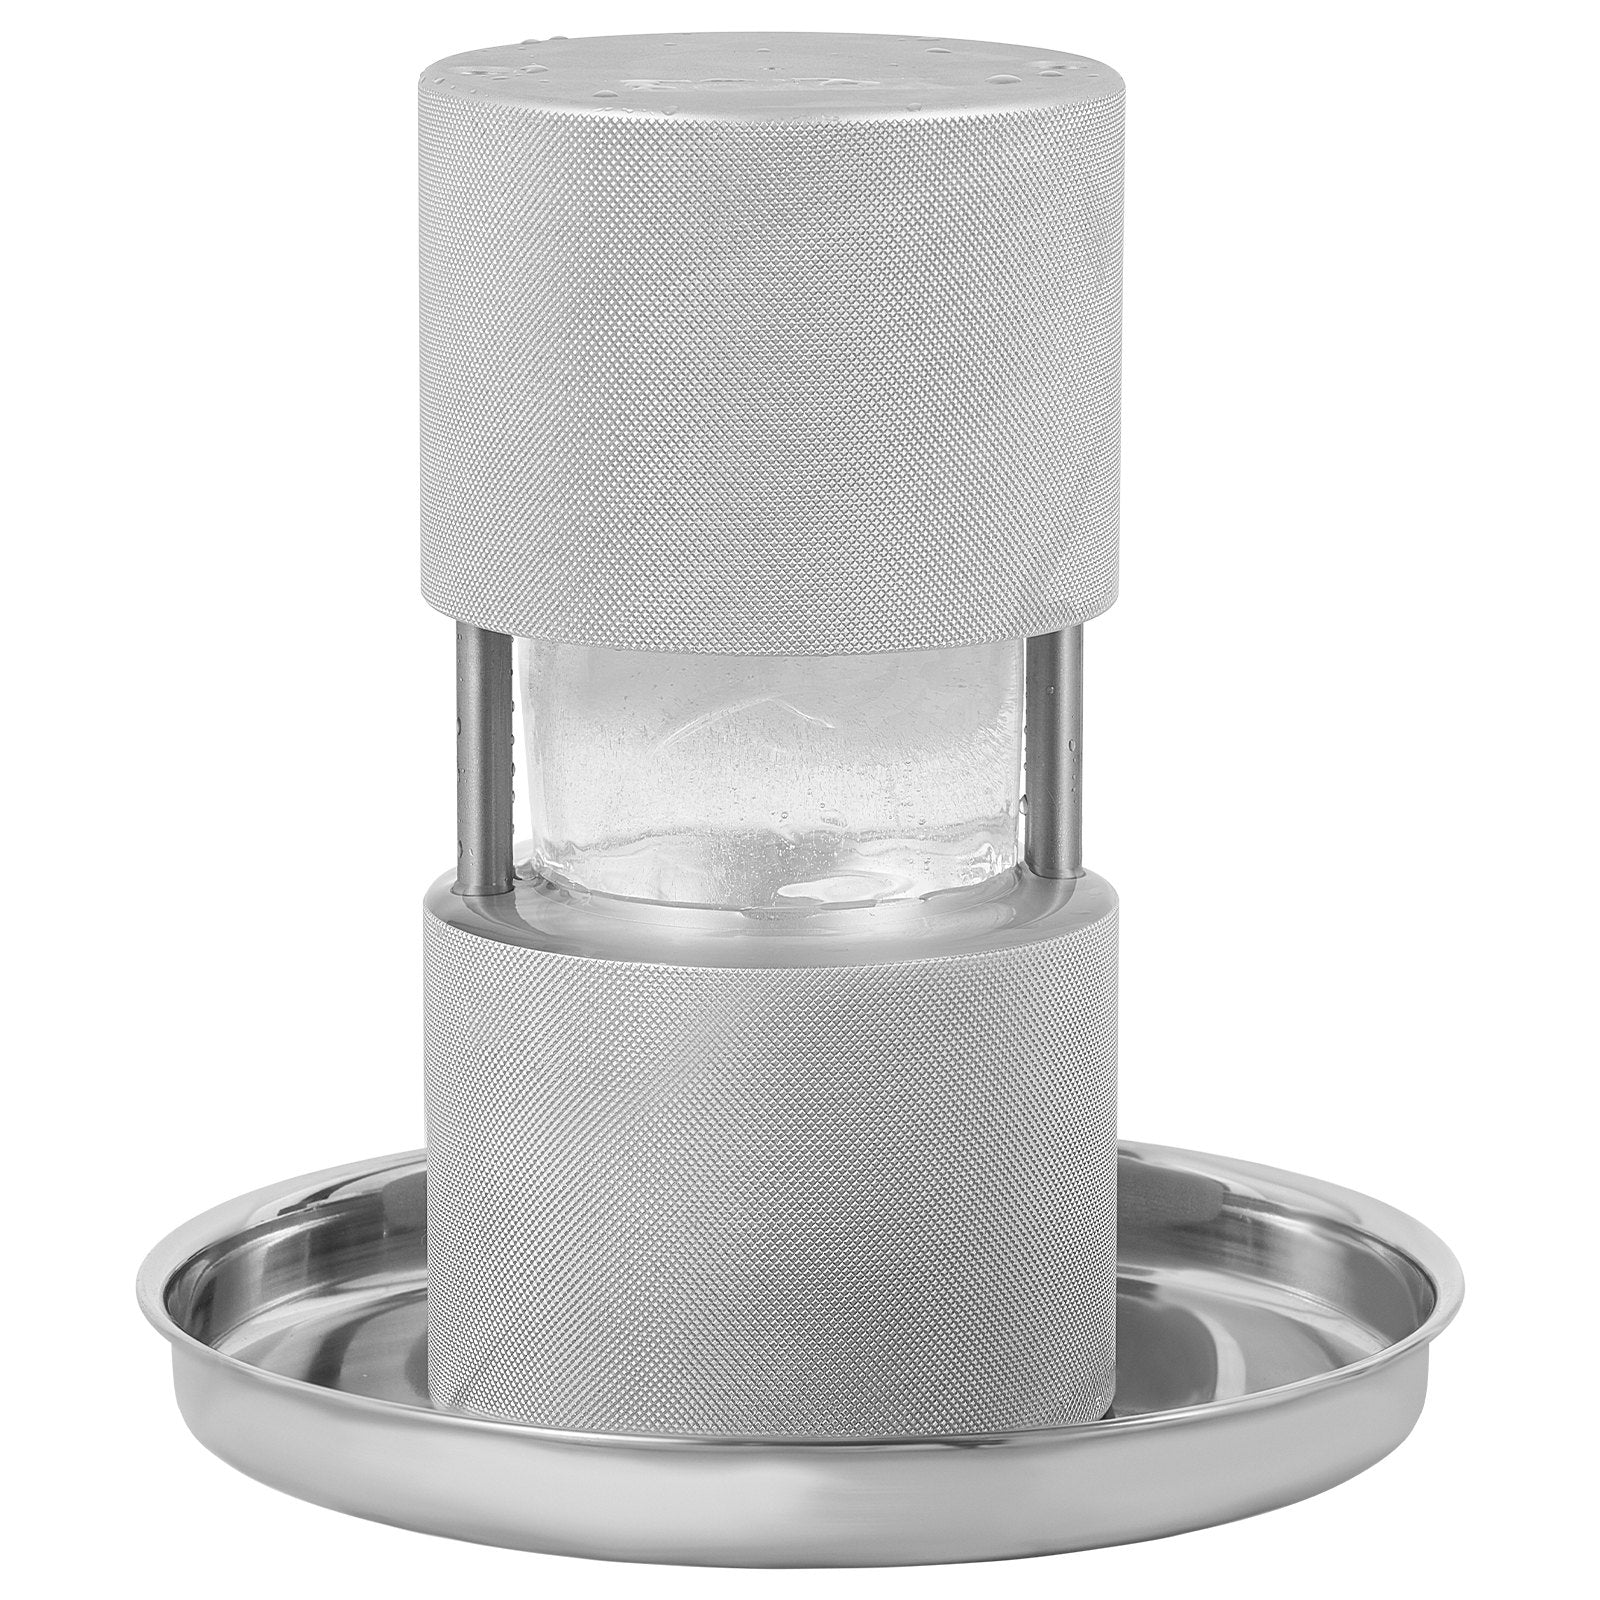 VEVOR Ice Ball Press, 2.4" Ice Ball Maker, Aircraft Al Alloy Ice Ball Press Kit for 60mm Ice Sphere, Ice Press with Tong and Drip Tray, for Whiskey, Cocktail, Bourbon, Scot on Party & Holiday, Silver-7